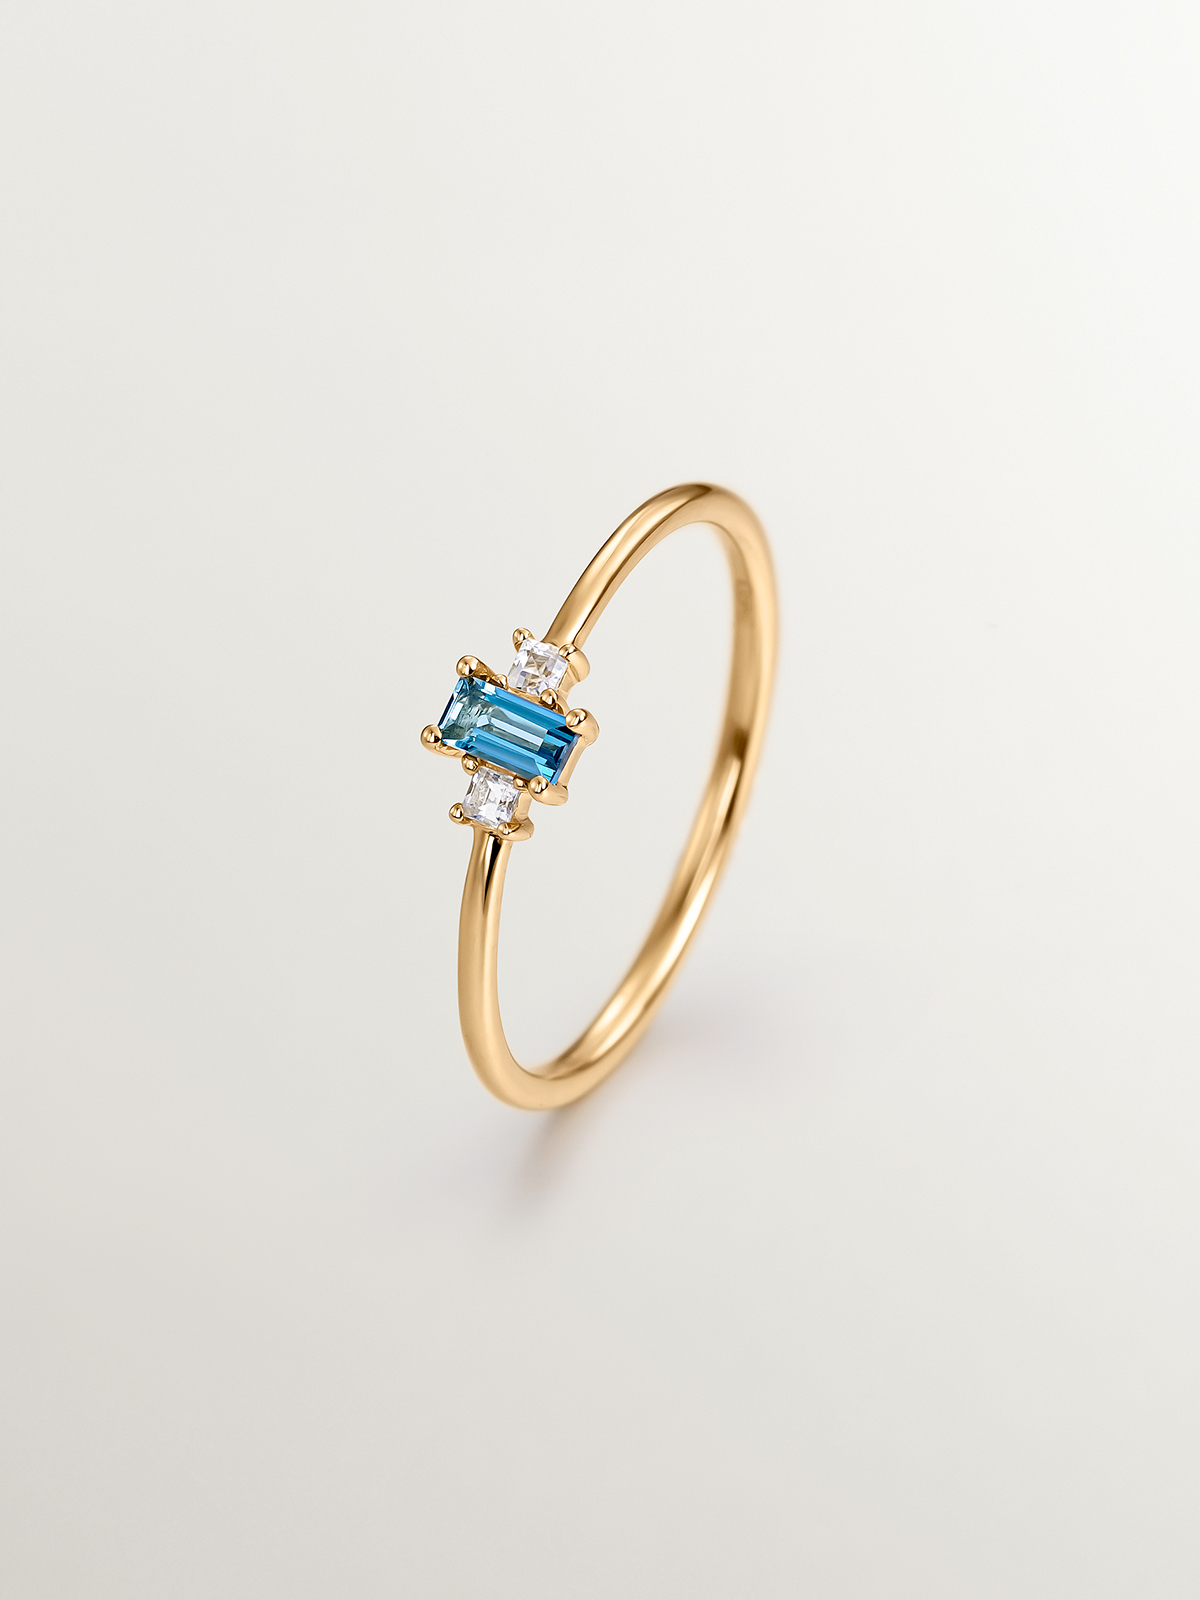 925 silver ring bathed in 18k yellow gold with swiss blue and white topacios